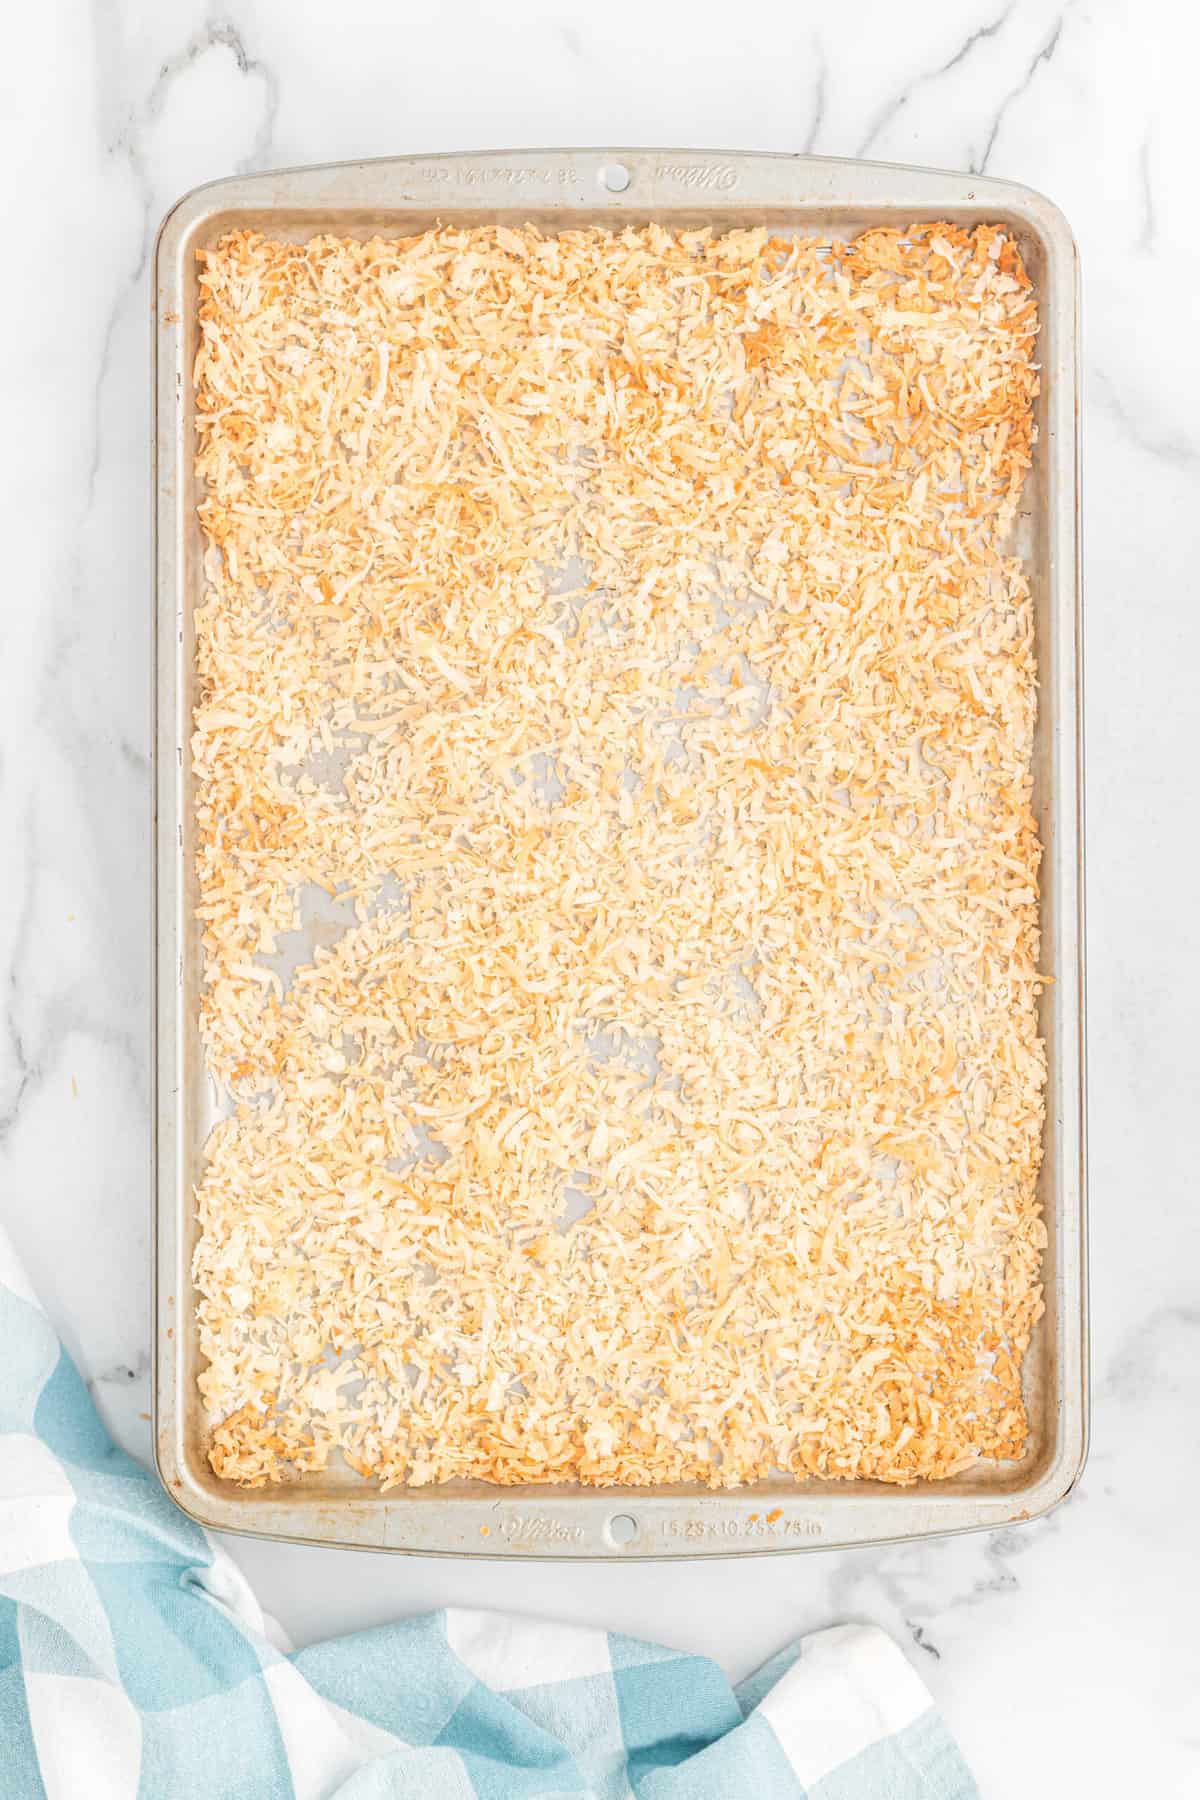 Toasted shredded coconut on a baking sheet.